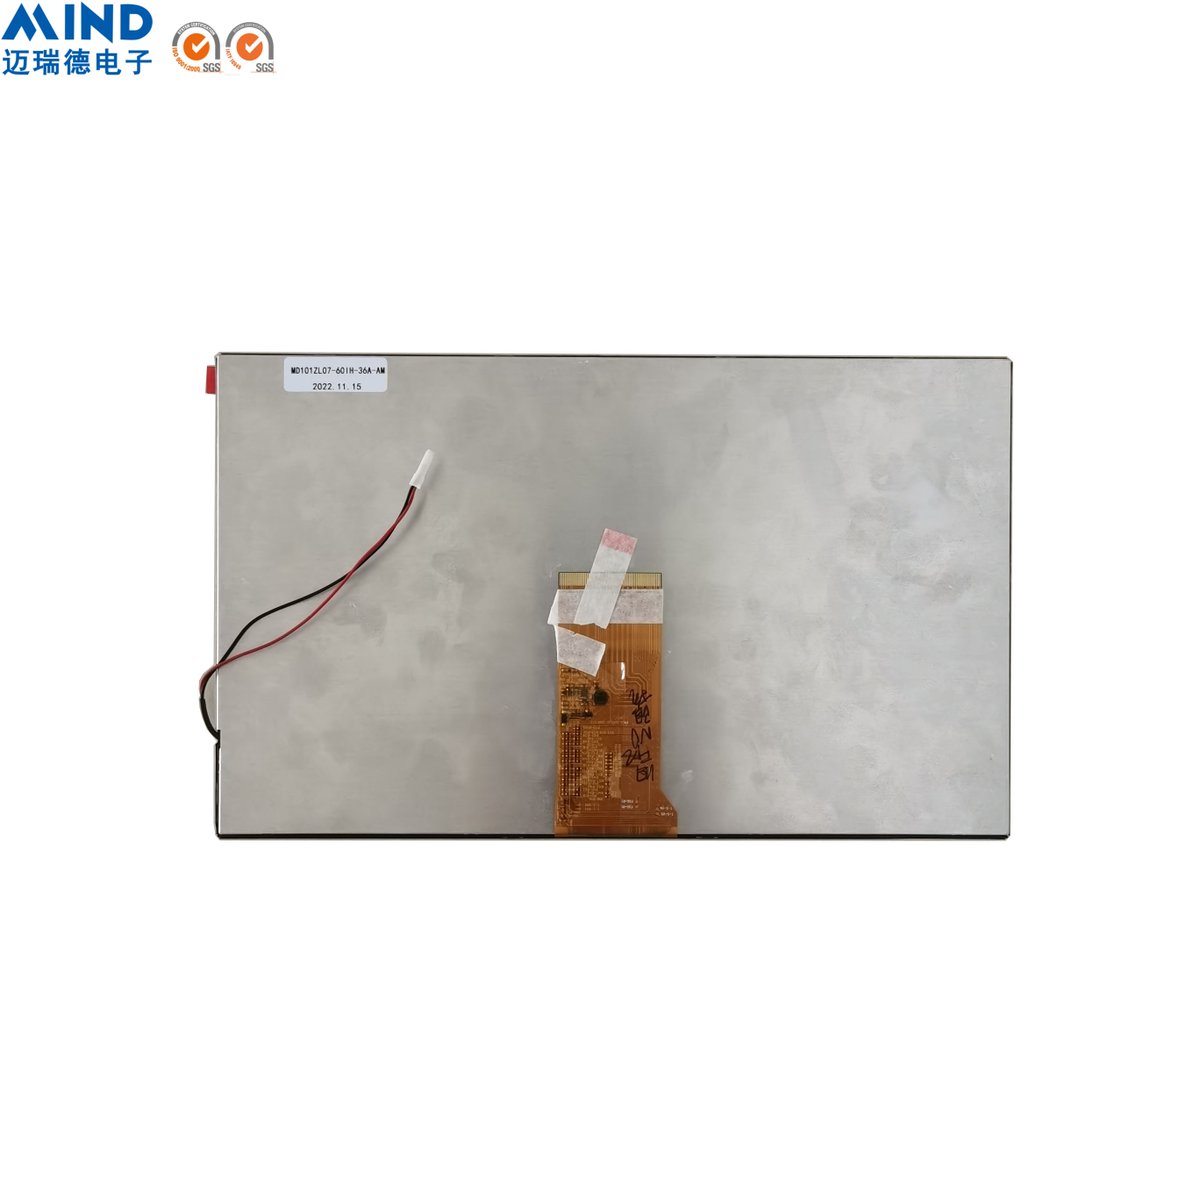 🏖🏖MIND Automotive Custom 10.1 Inch High Luminance 1280X720 IPS Screen LVDS Interface All Angle Display China manufacturer TFT LCM🎈🎈
#LCD #LCM #LCDmodule #Touchscreen #Highbrightness #LCDScreen #BarTypeLCD #SquareTFT #TouchPanel #EV
Email: Rick@szmind.com.cn